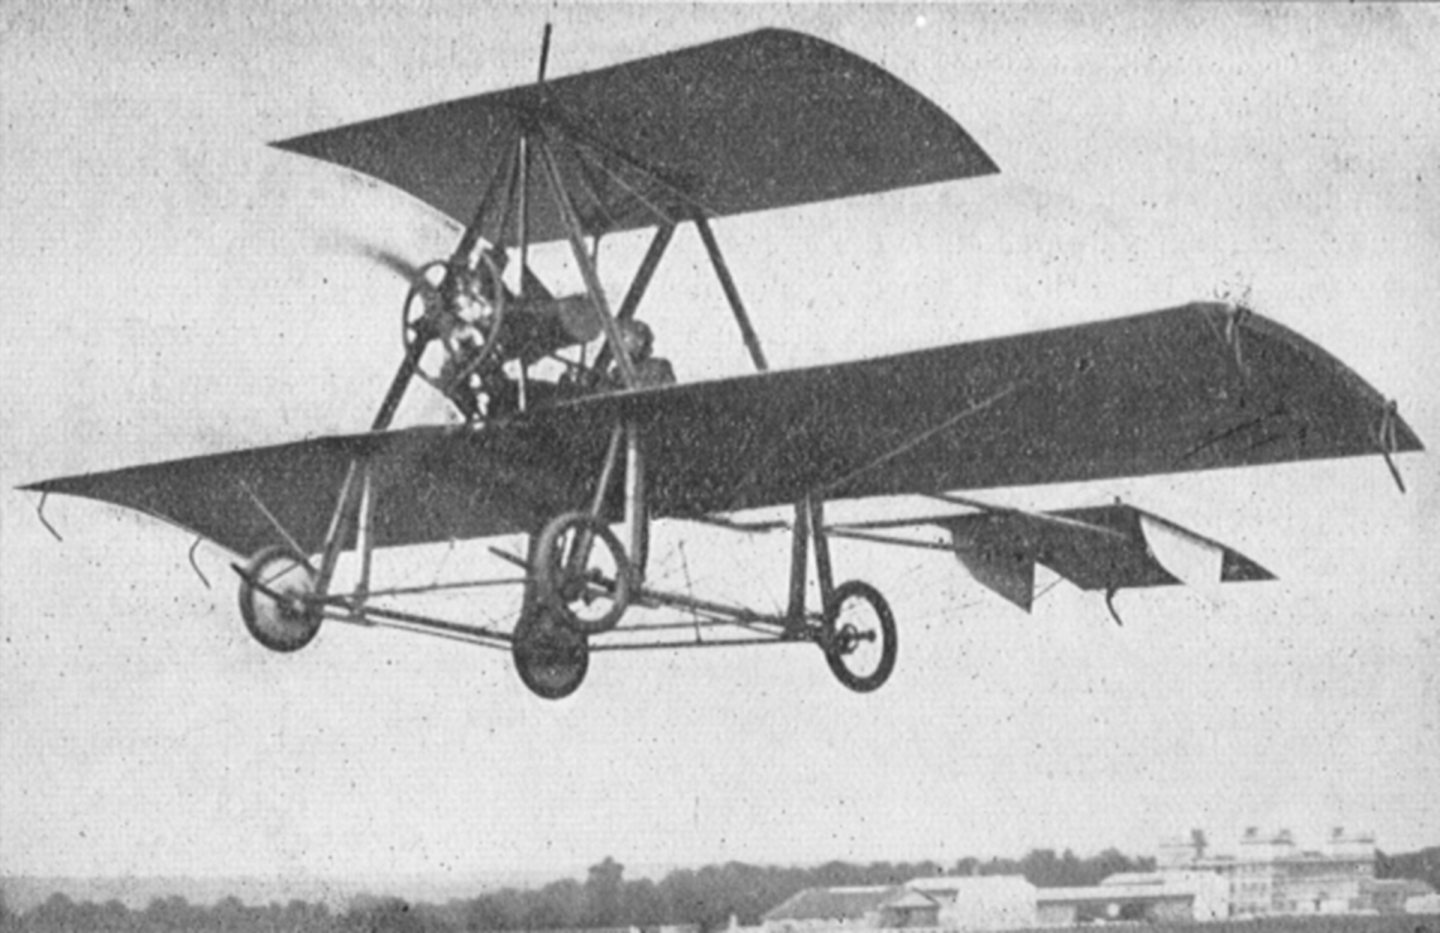 Watson's No.3 in flight at Buc in France during the Concours de La Sécurité en Aéroplanes competition, photographed by German magazine Flugsport's Paris correspondent. Its overall size is evident by comparison to its pilot.